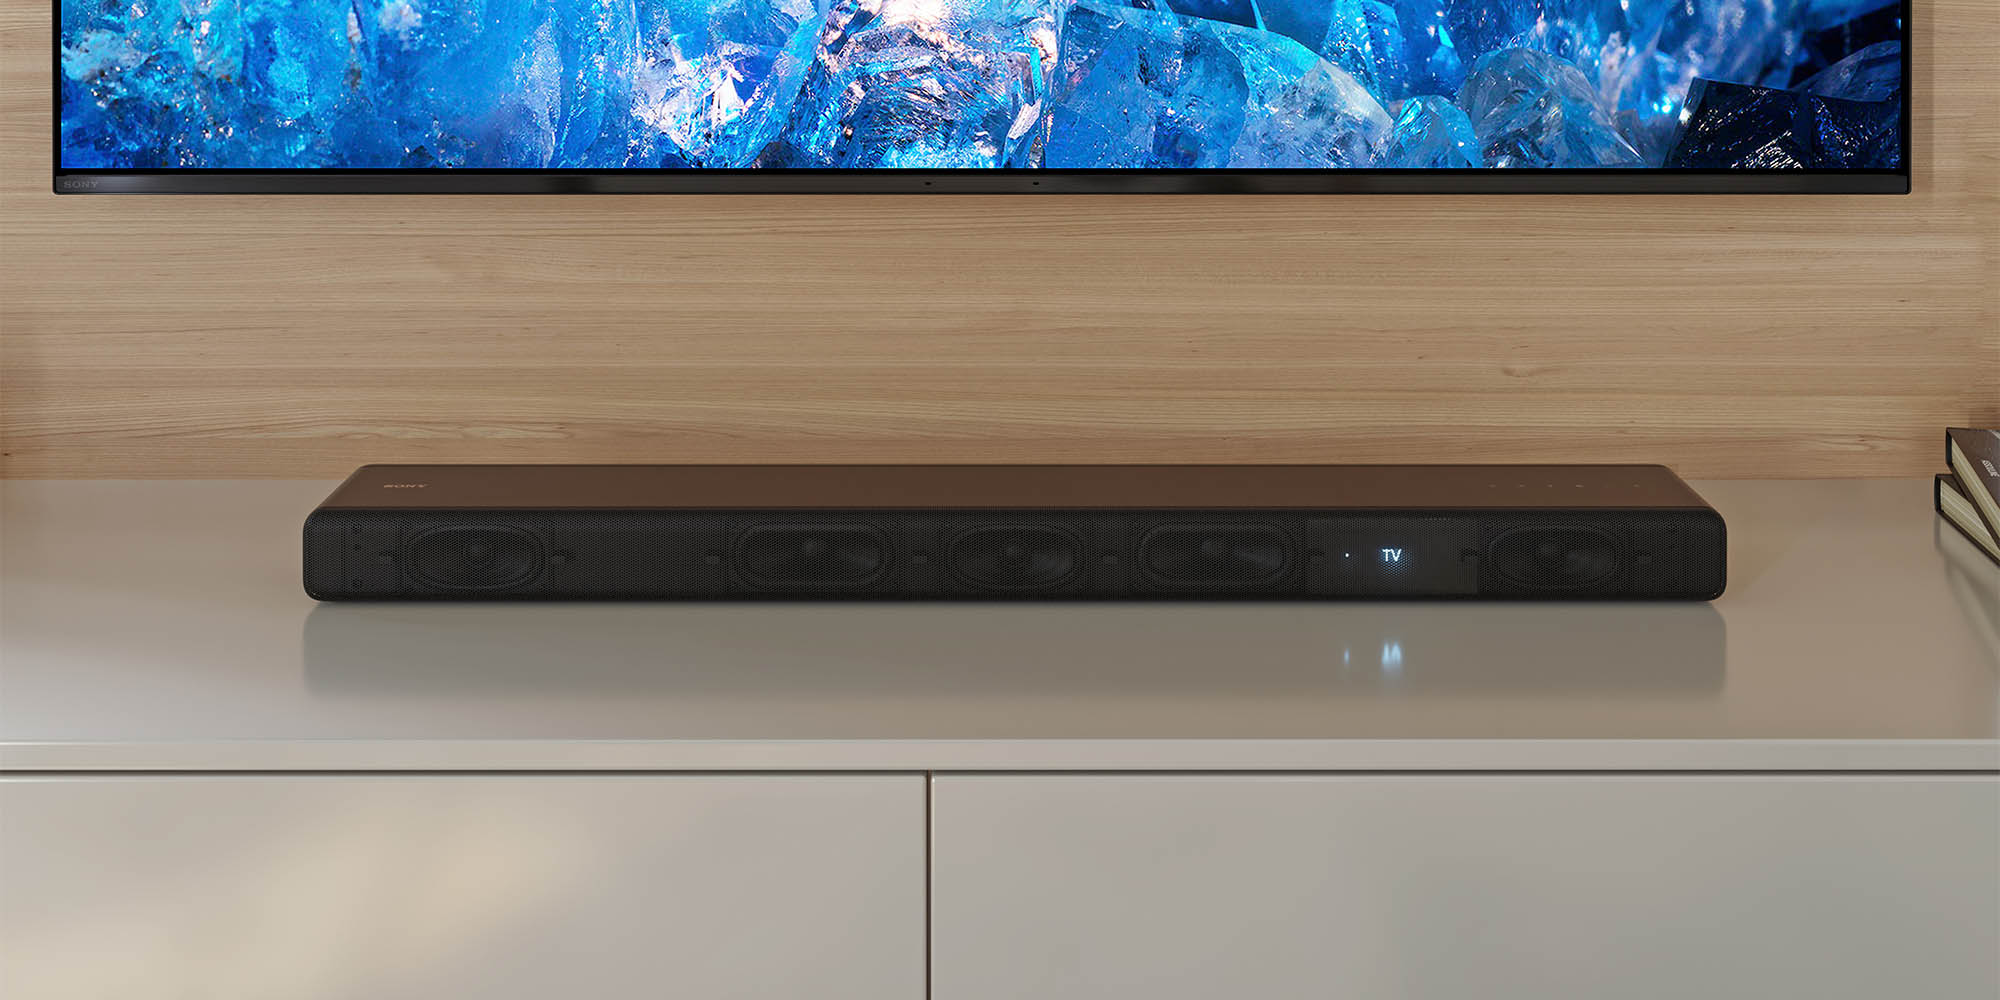 Sony launches new 3.1-channel Dolby soundbar with built-in AirPlay 2 and Chromecast